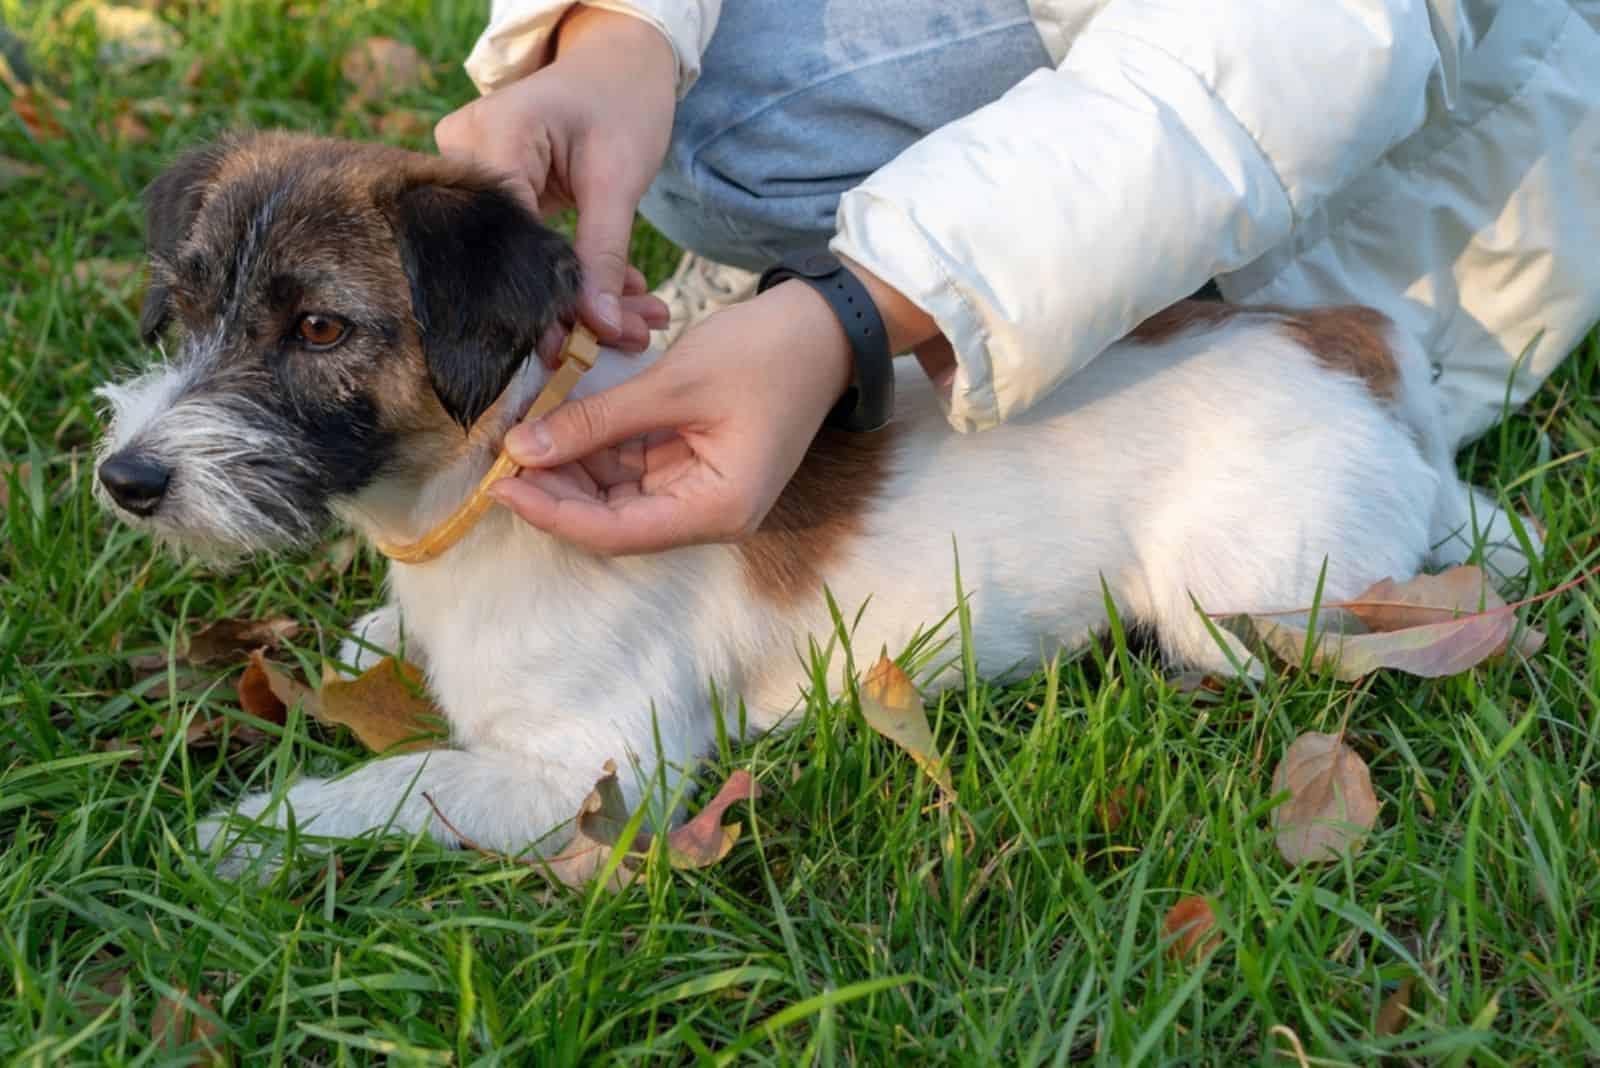 man putting special collar to protect dog from ticks